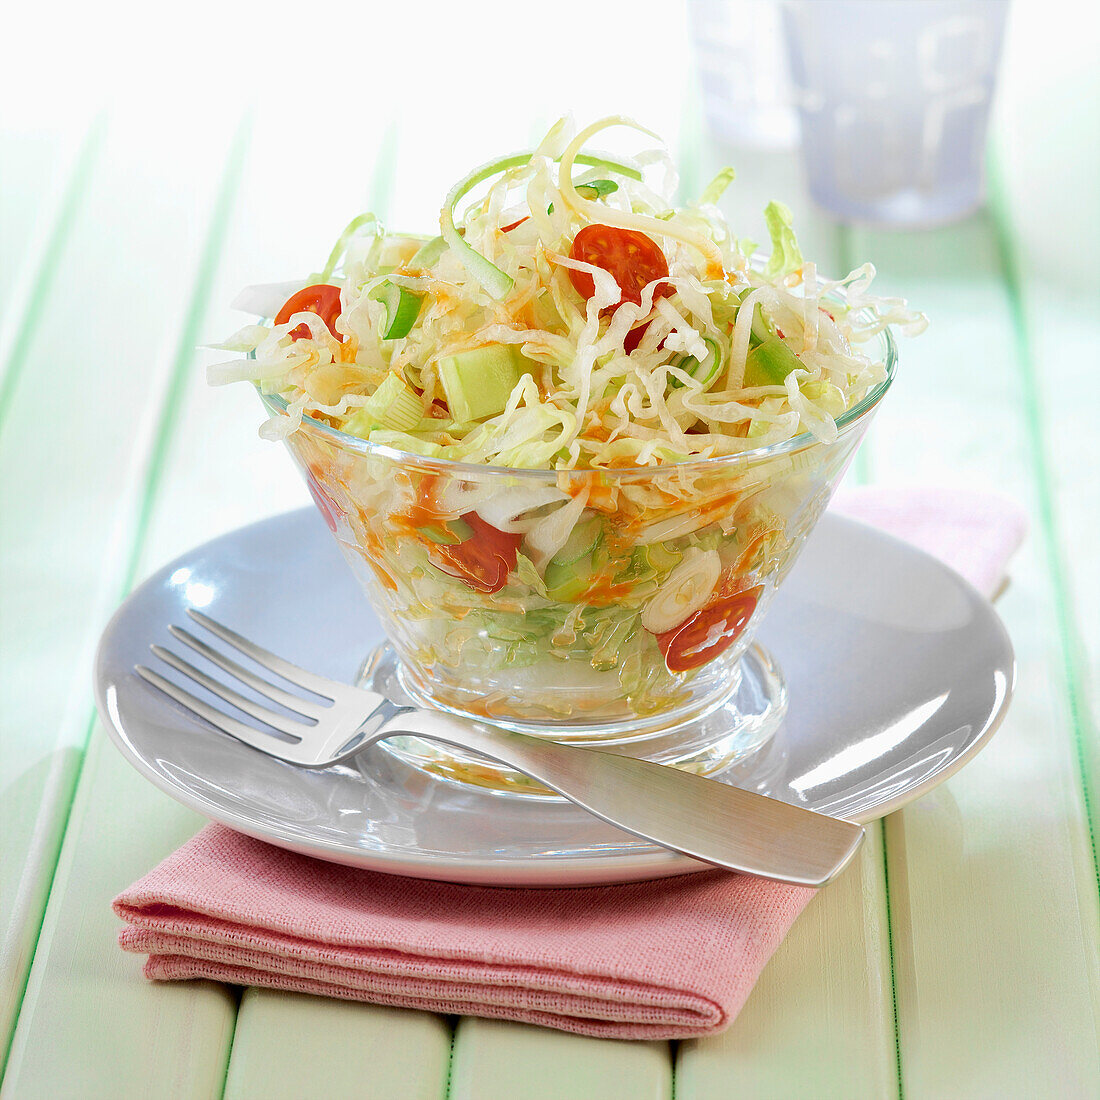 Cabbage,tomato and cucumber salad